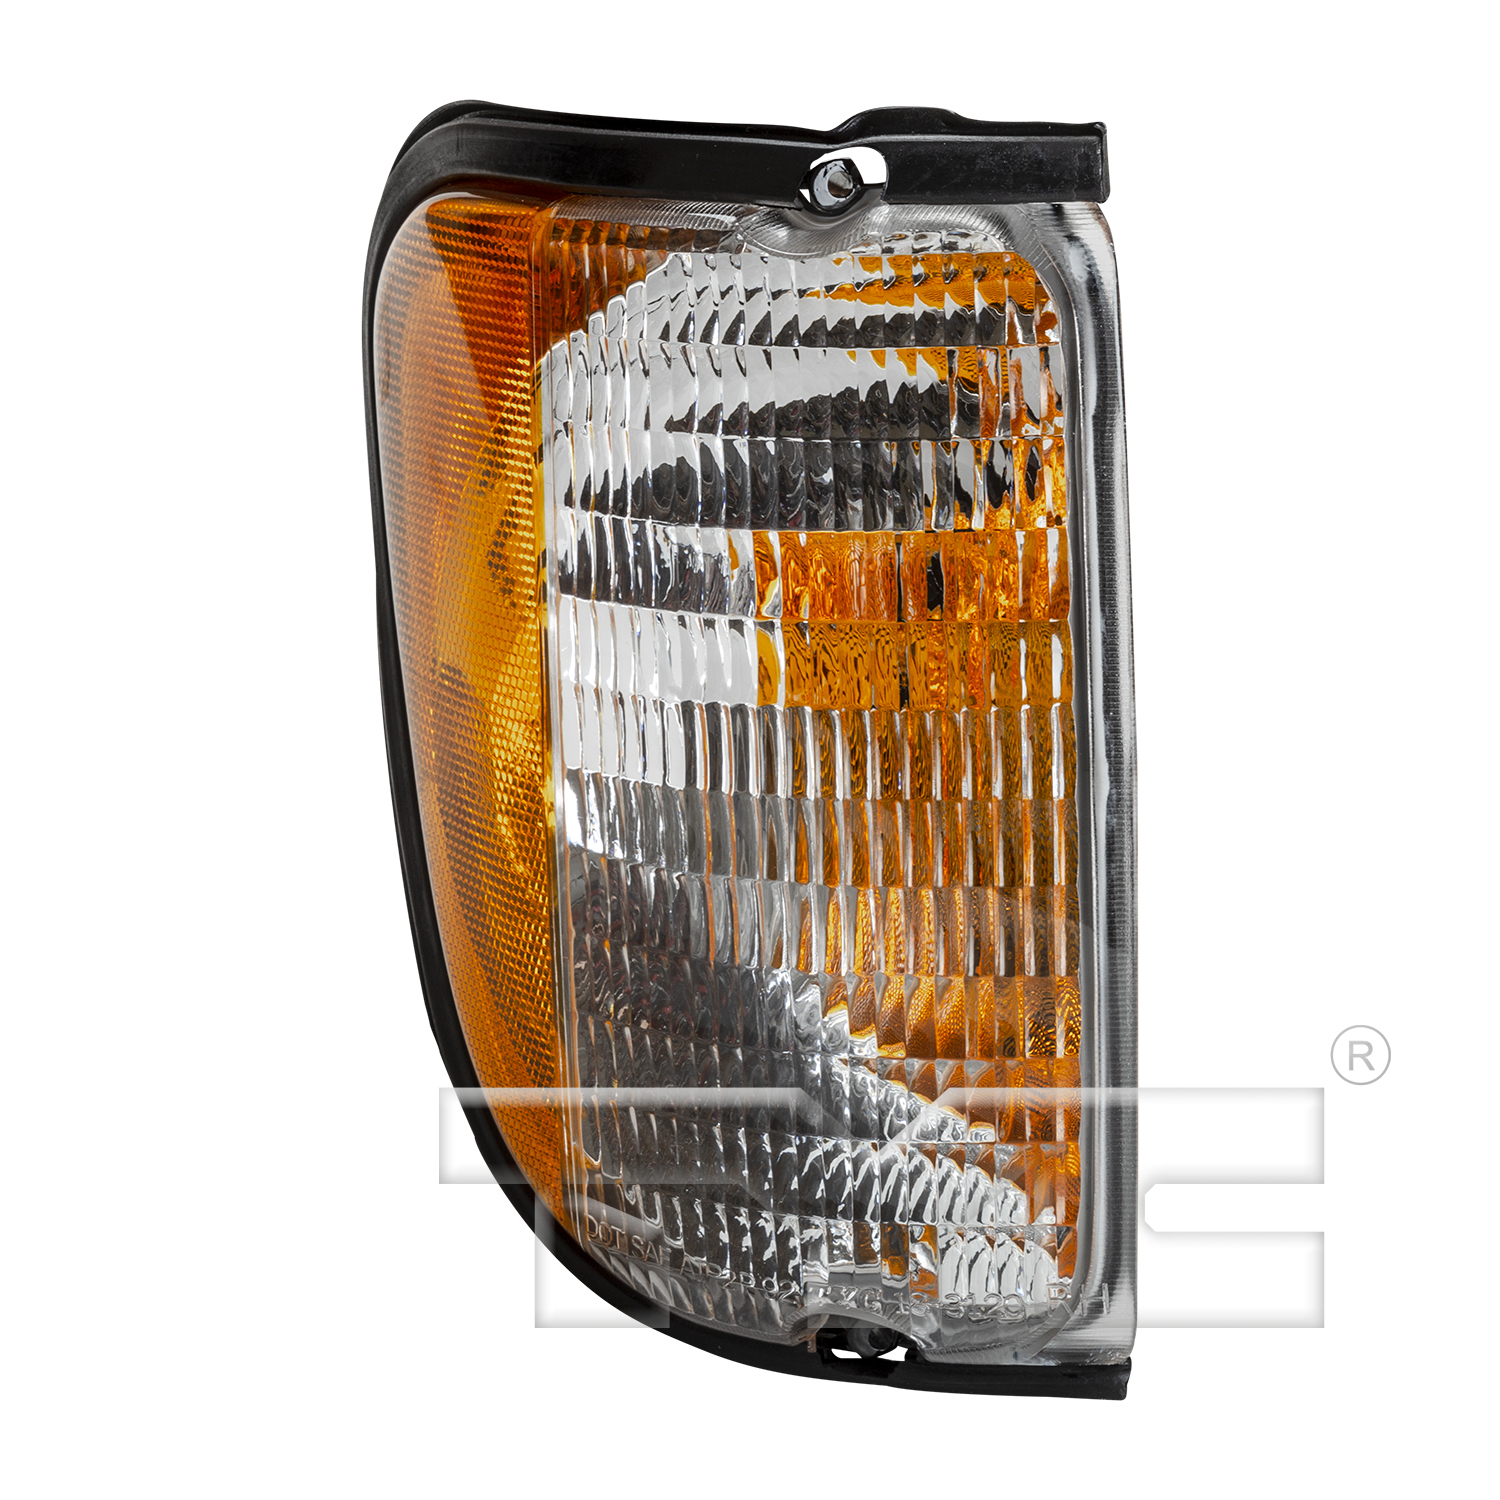 Aftermarket LAMPS for FORD - E-150 CLUB WAGON, E-150 CLUB WAGON,03-03,RT Parklamp assy